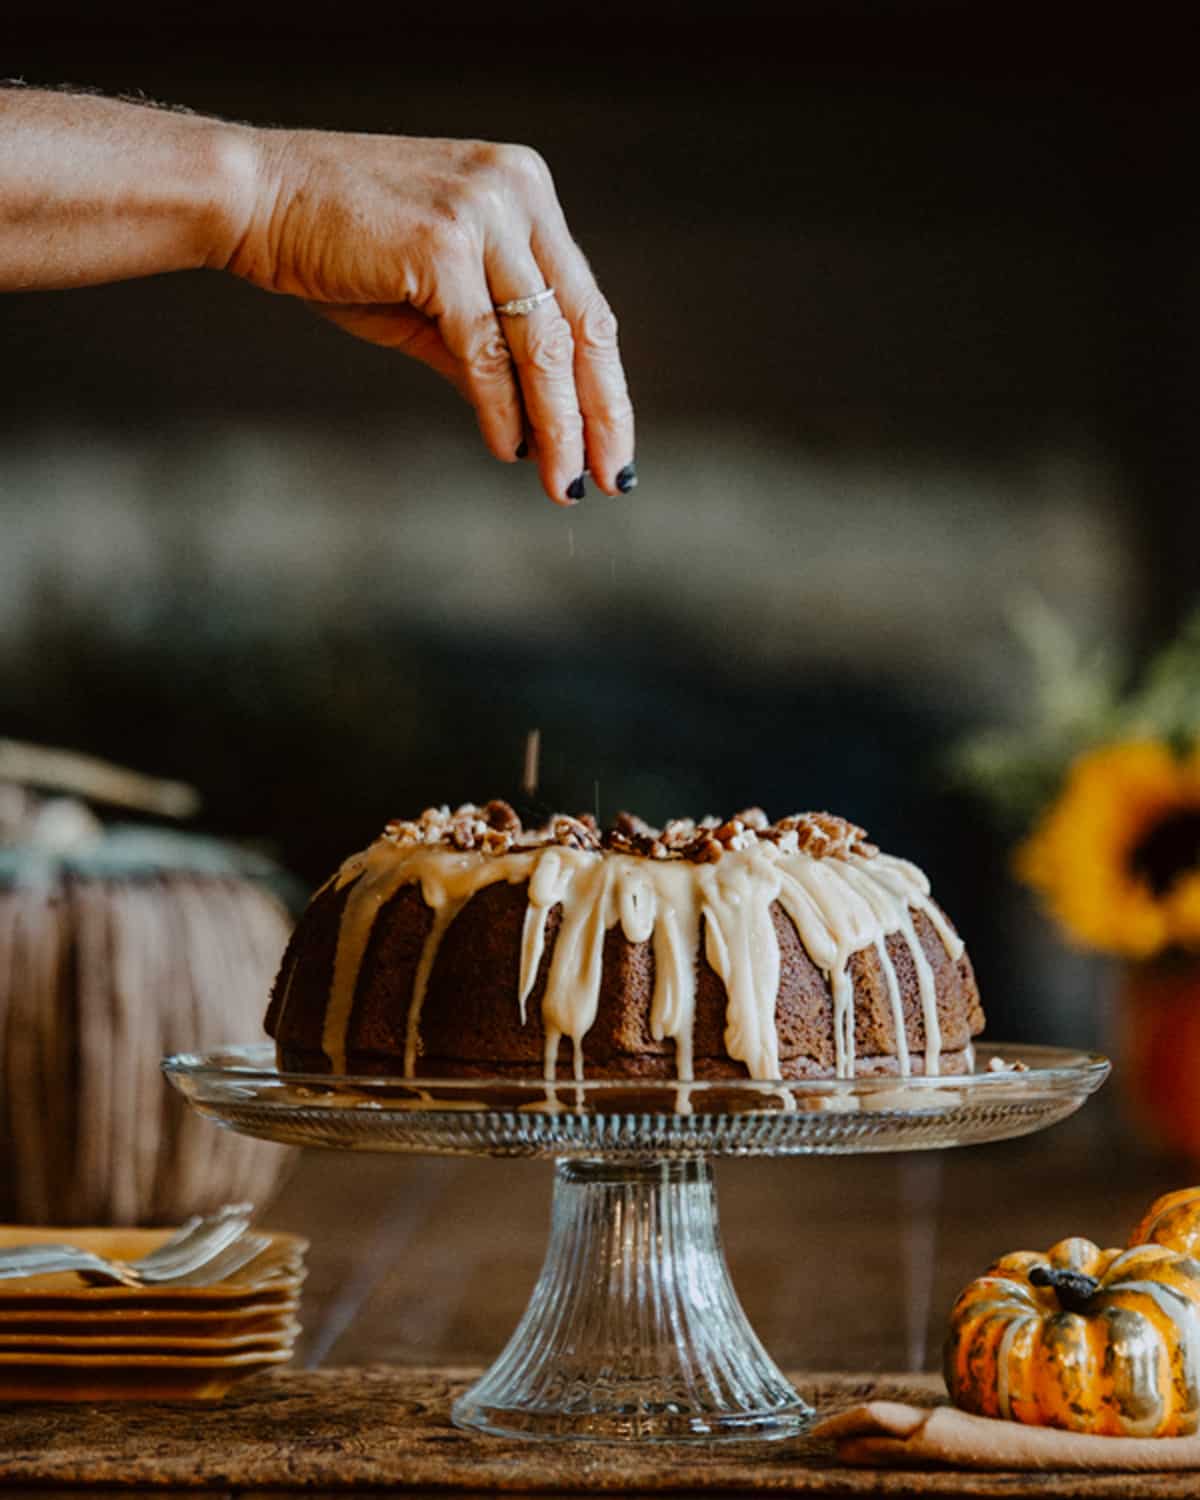 Pumpkin bundt cake on a glass cake stand with flowers in the background.